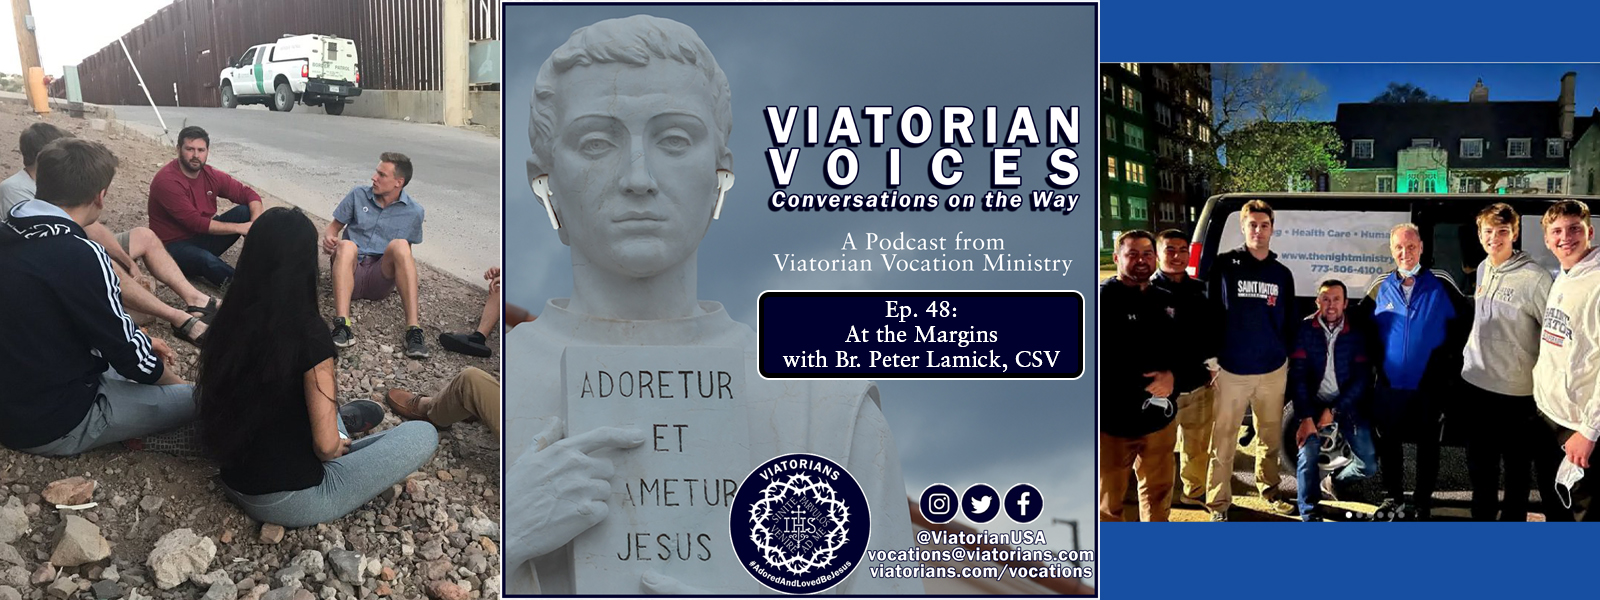 Br. Peter Lamick Reflects on Viatorians and Serving People on the Margins